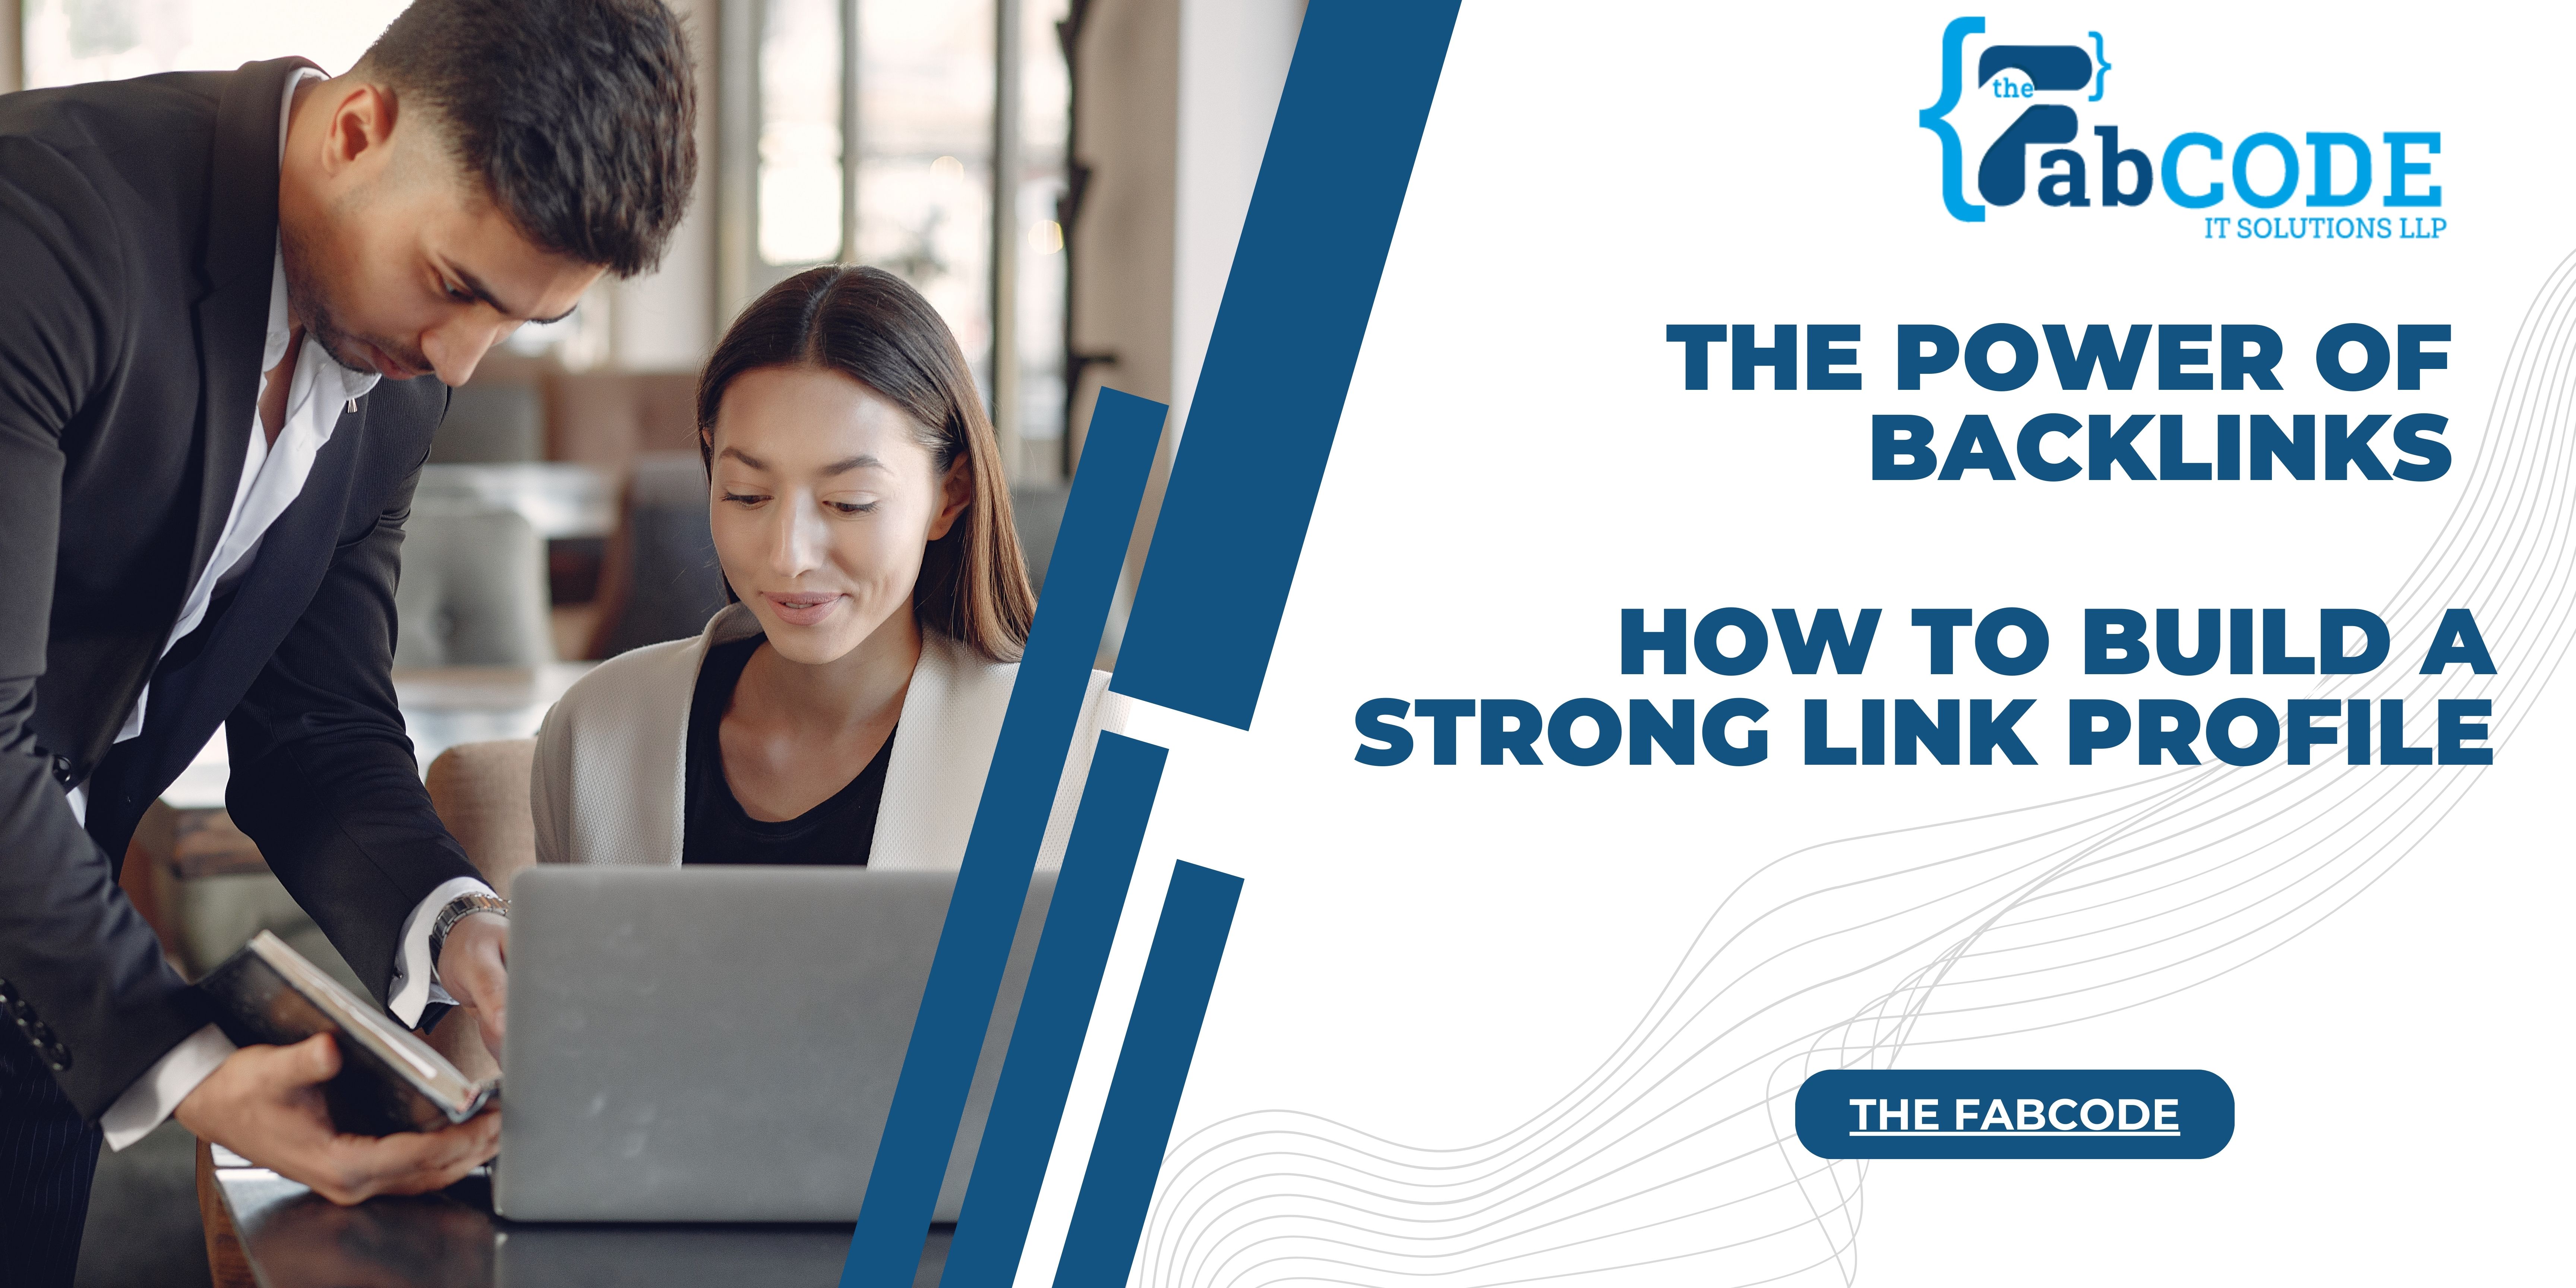 The Power of Backlinks: How to Build a Strong Link Profile